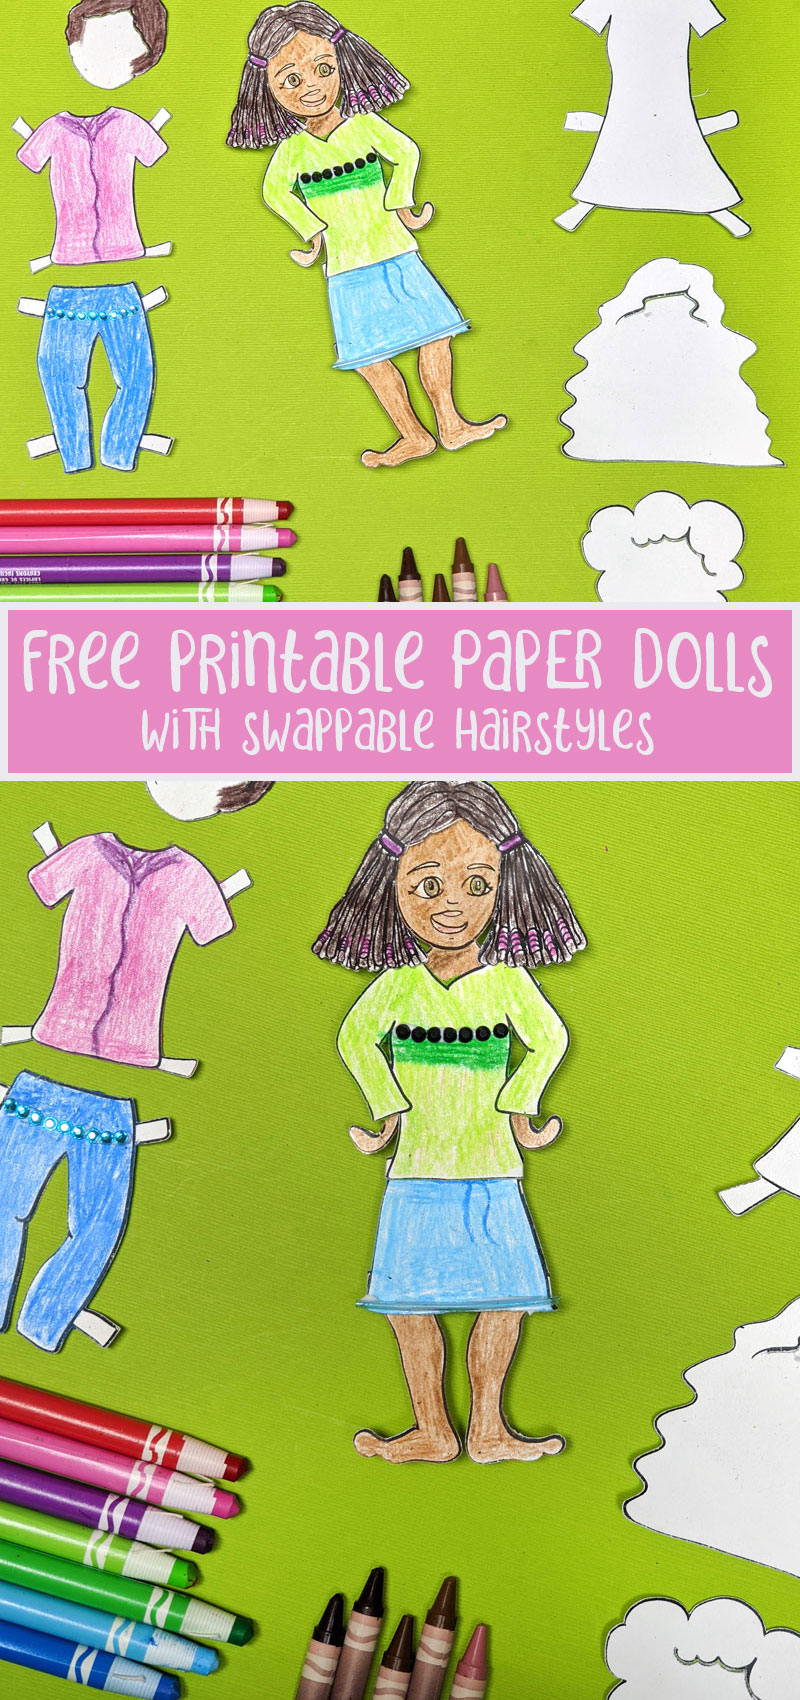 Paper doll coloring pages